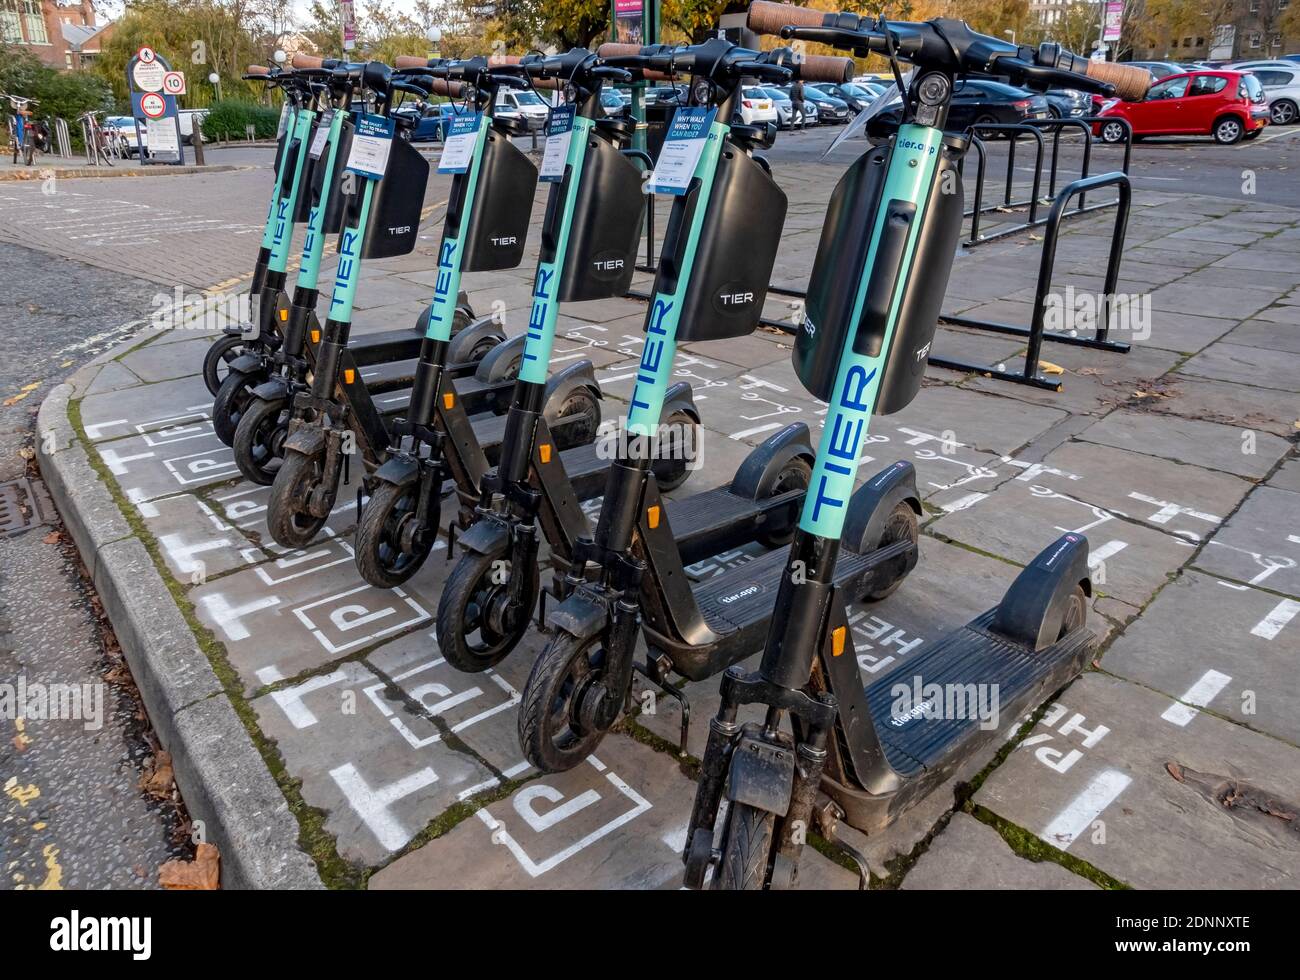 TIER E-scooters E scooter electric scooters for hire rent rental in city town centre York North Yorkshire England UK United Kingdom GB Great Britain Stock Photo